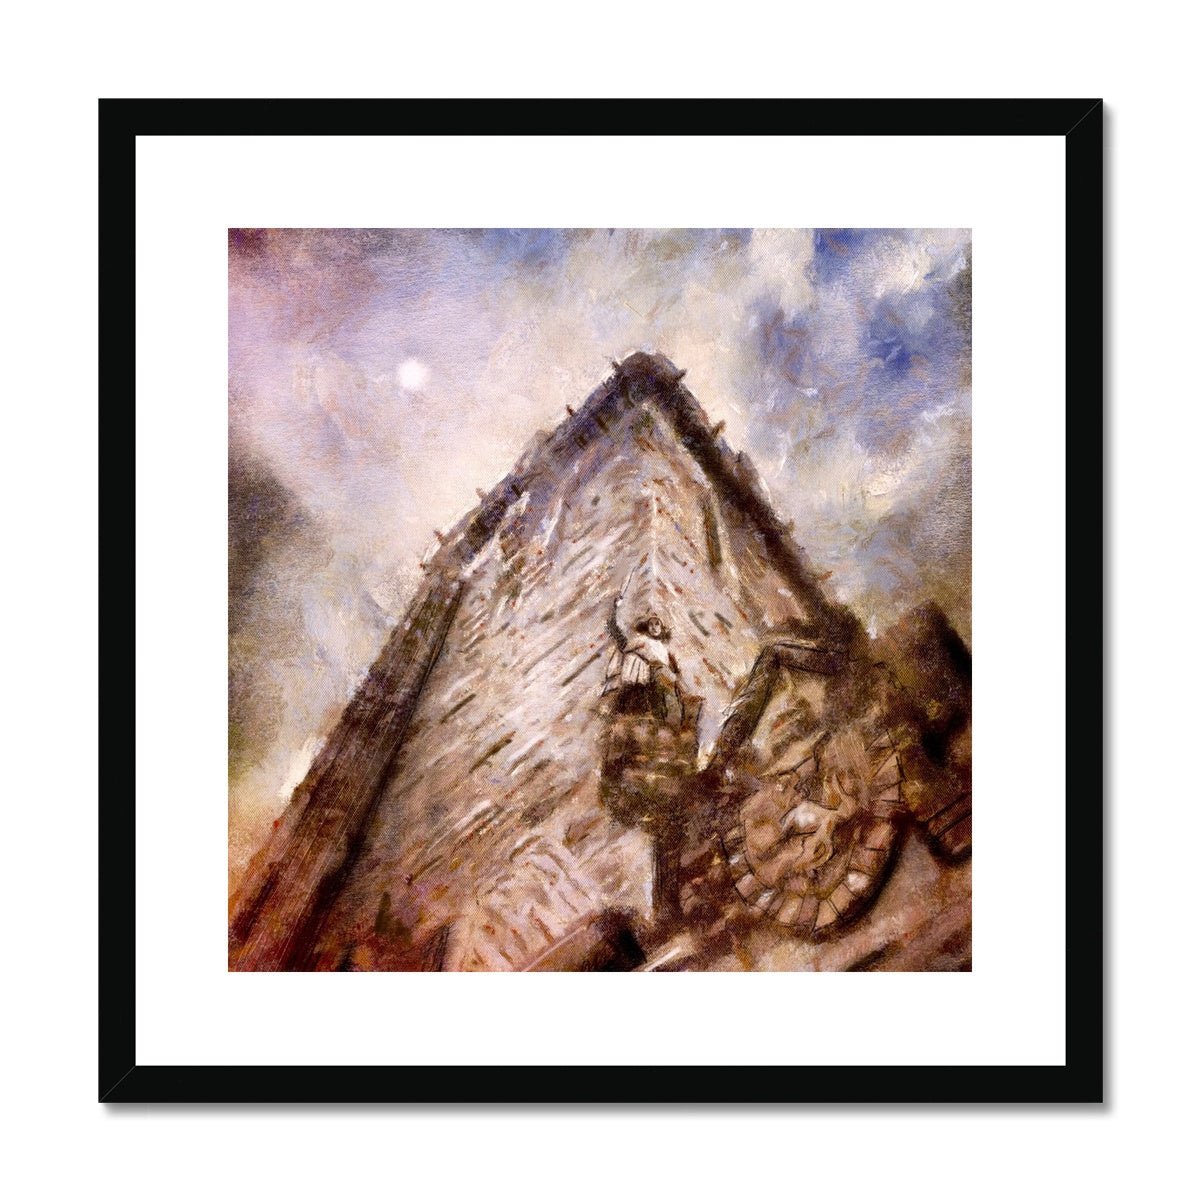 Wallace Monument Moonlight Painting | Framed & Mounted Prints From Scotland-Framed & Mounted Prints-Historic & Iconic Scotland Art Gallery-20"x20"-Black Frame-Paintings, Prints, Homeware, Art Gifts From Scotland By Scottish Artist Kevin Hunter